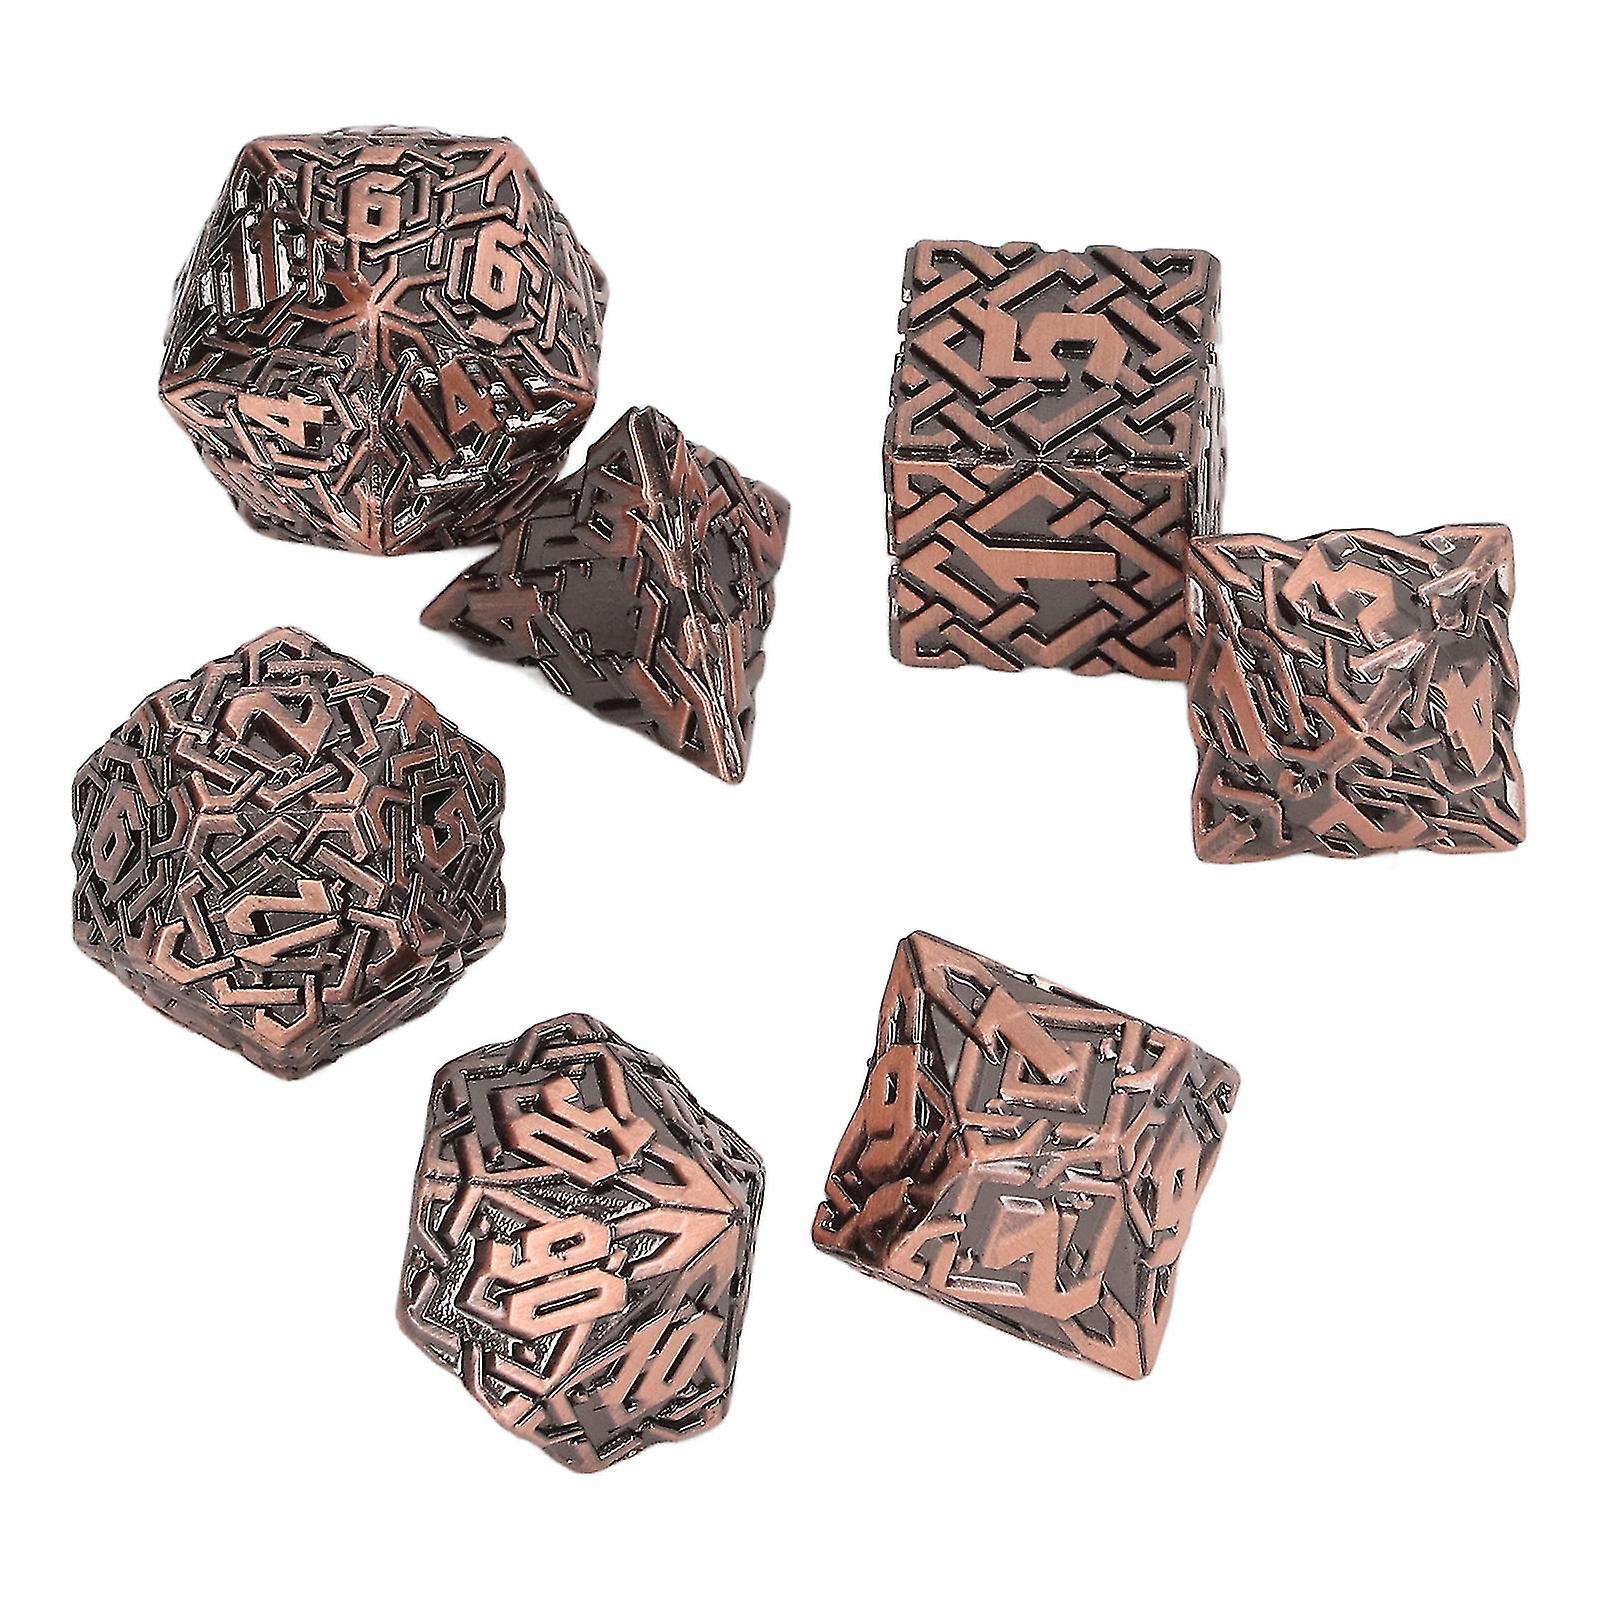 7pcs Metal Dice Set Different Polyhedral Shapes Maze Patterns Board Games Dice for Role Playing Type 2